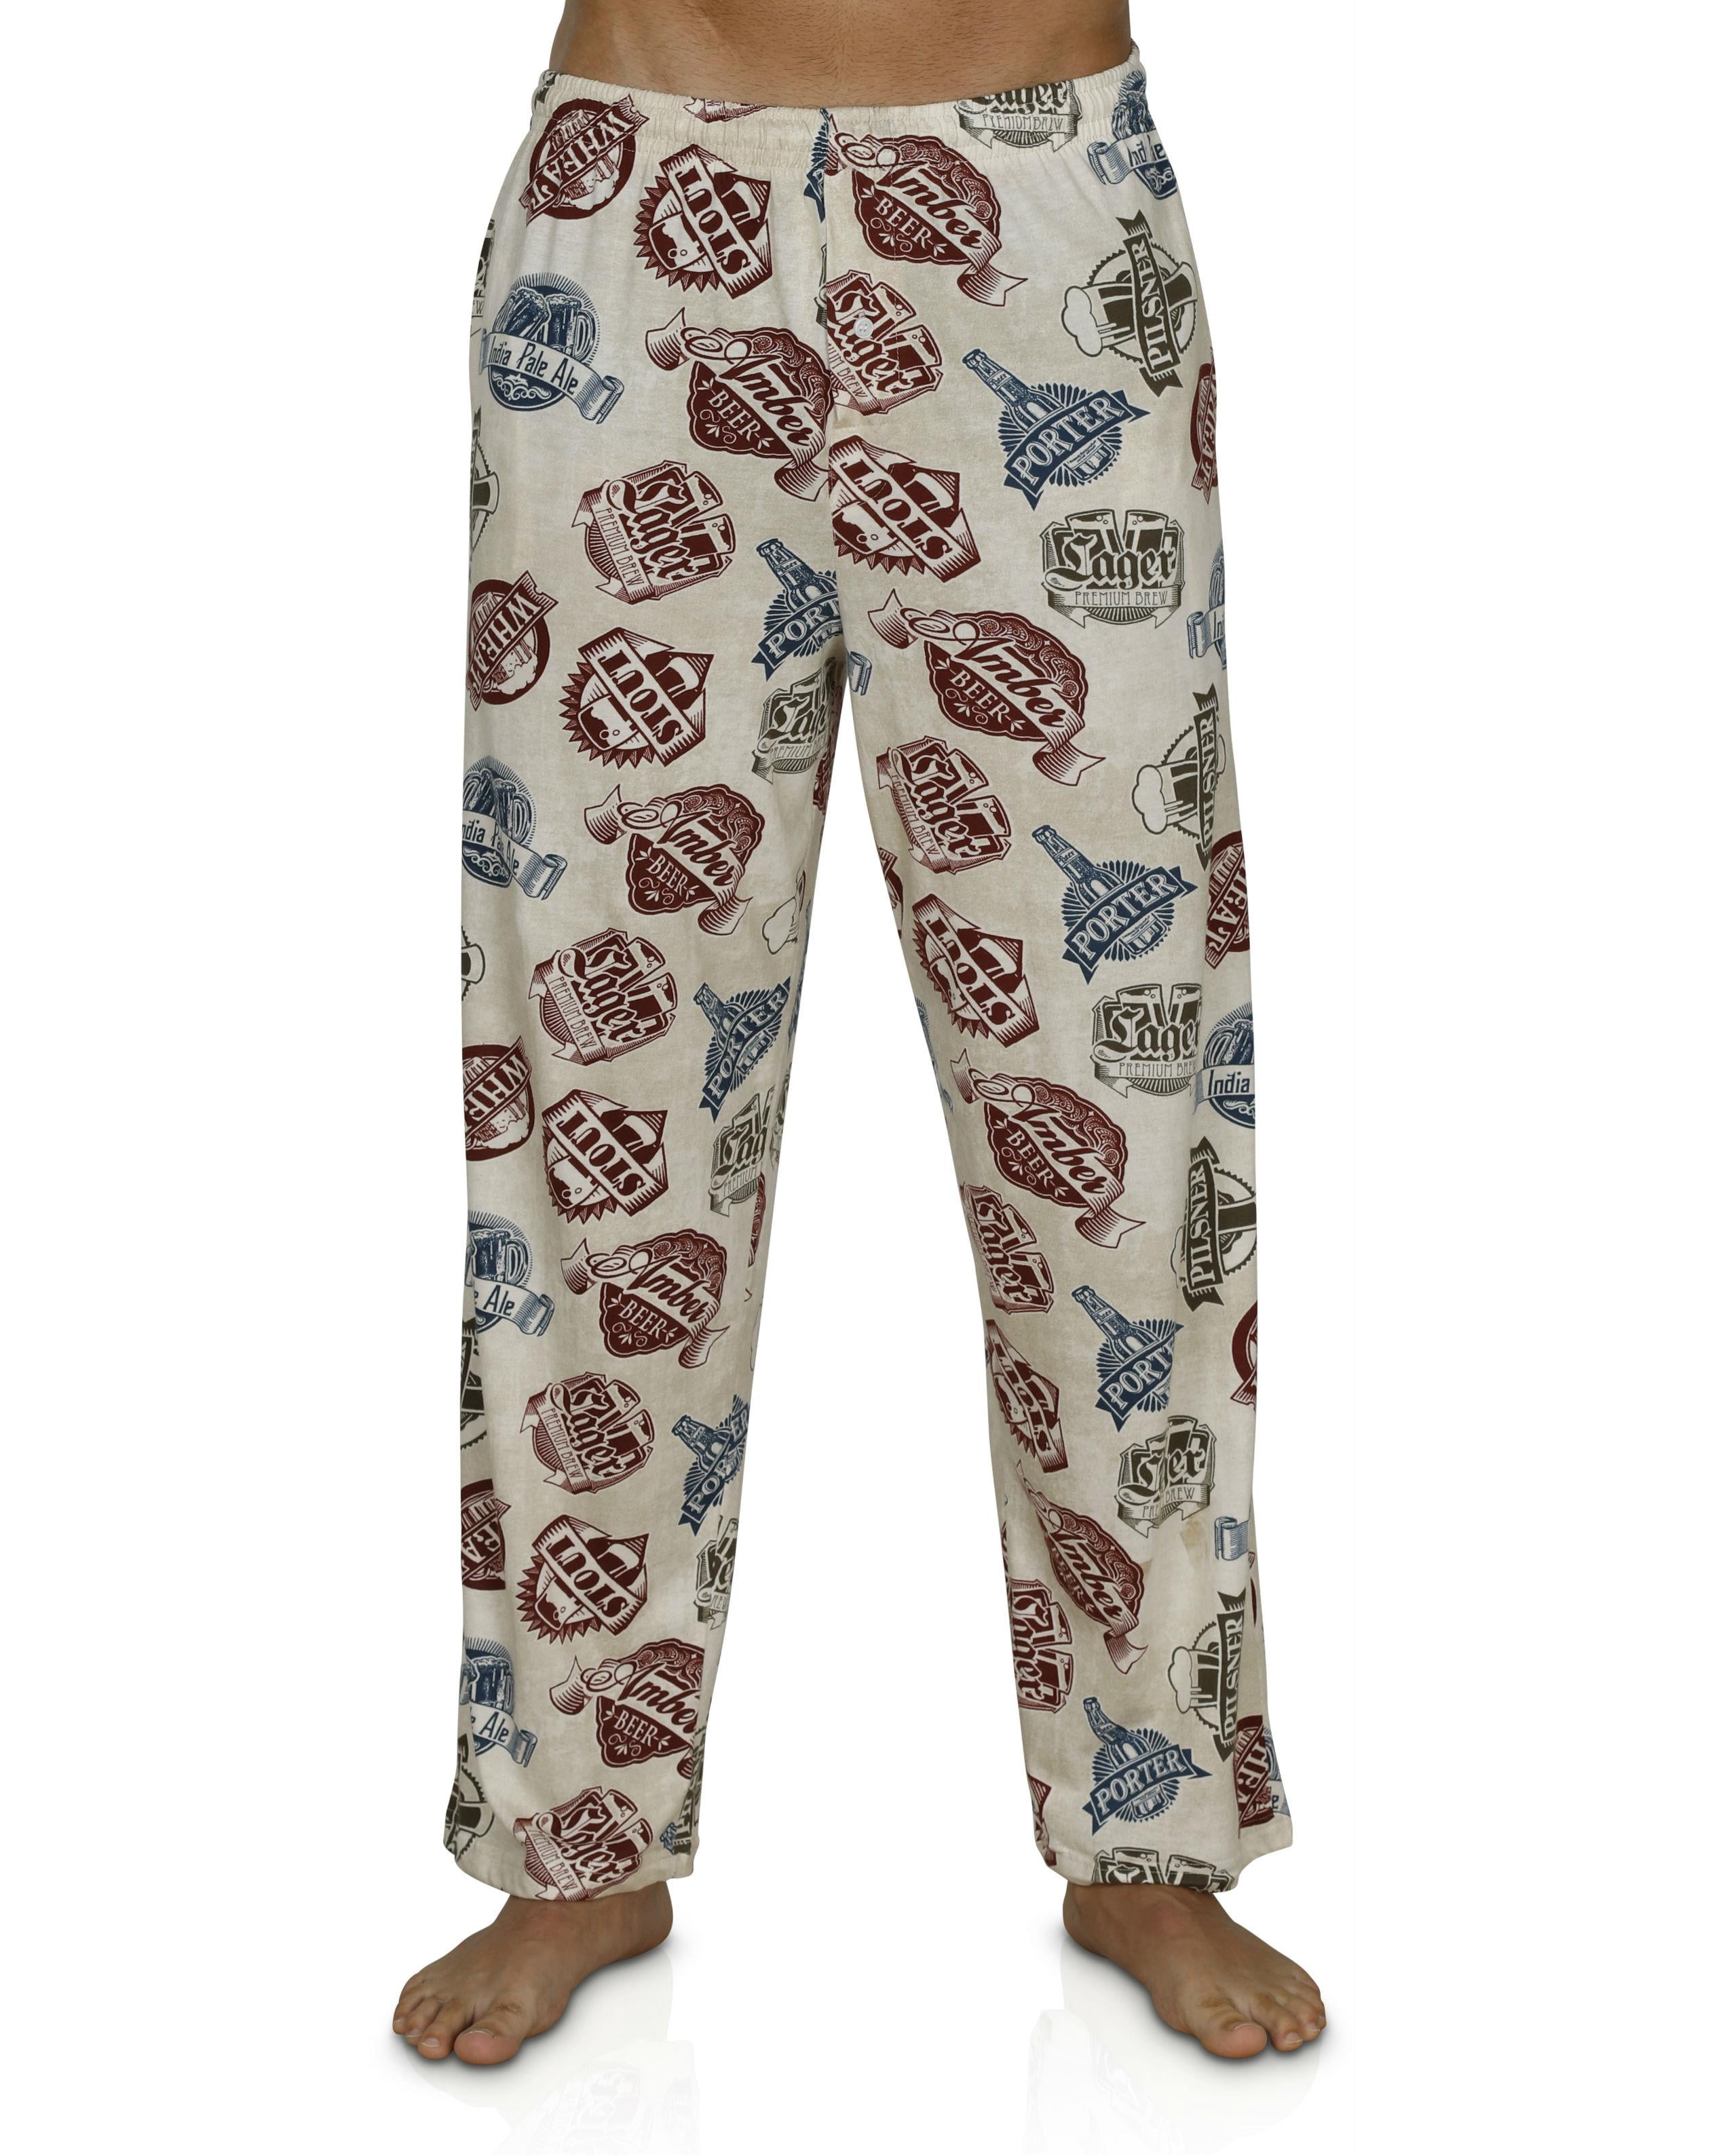 Sale - Men's Lazy One Pajamas offers: at $16.45+ | Stylight